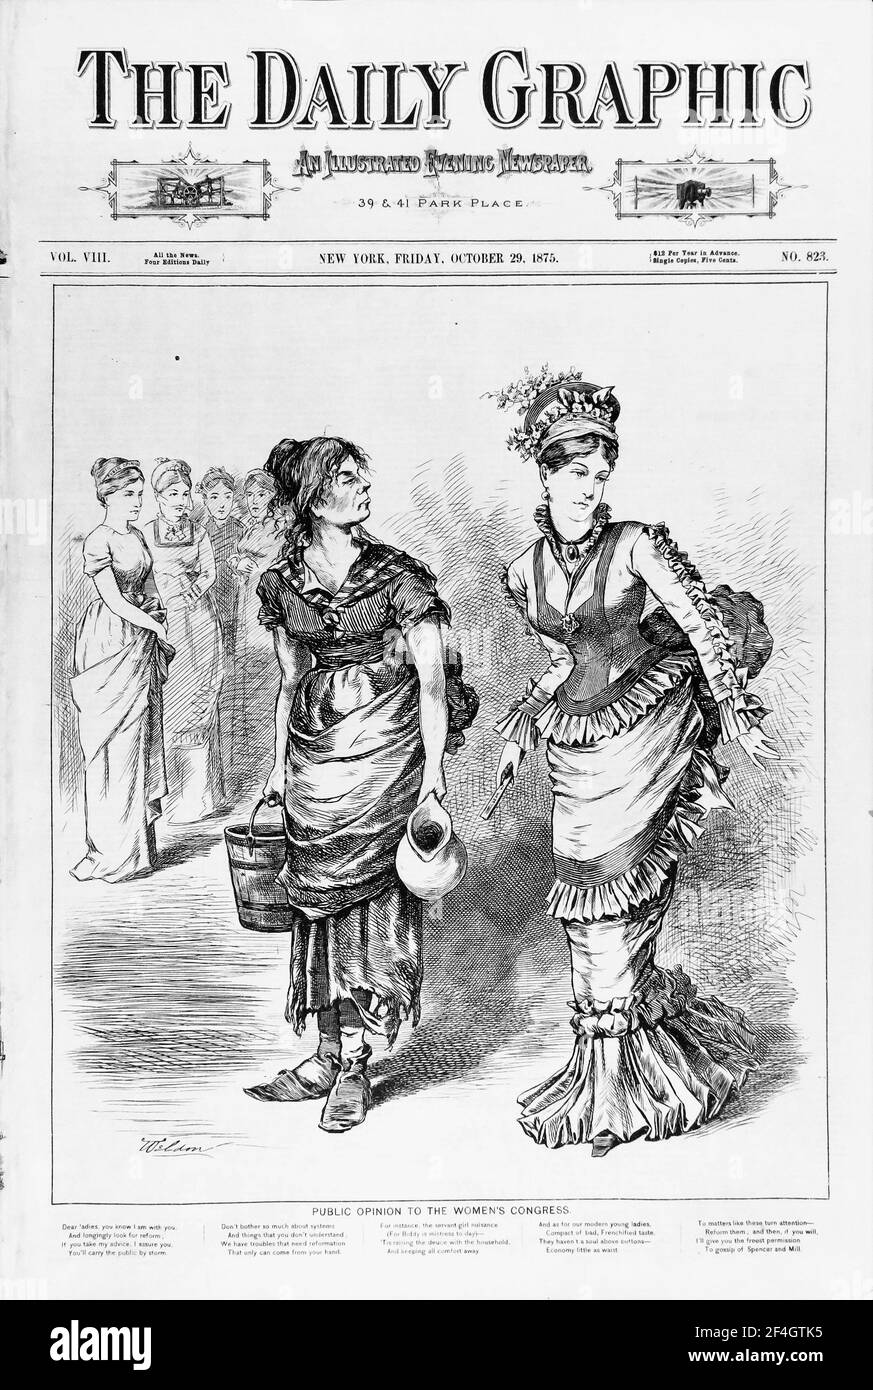 Cover illustration from The Daily Graphic, contrasting the privileged figure of a Women's Congress member with a 'working woman' they claimed to represent, published in New York for the American market, 1875. Photography by Emilia van Beugen. () Stock Photo